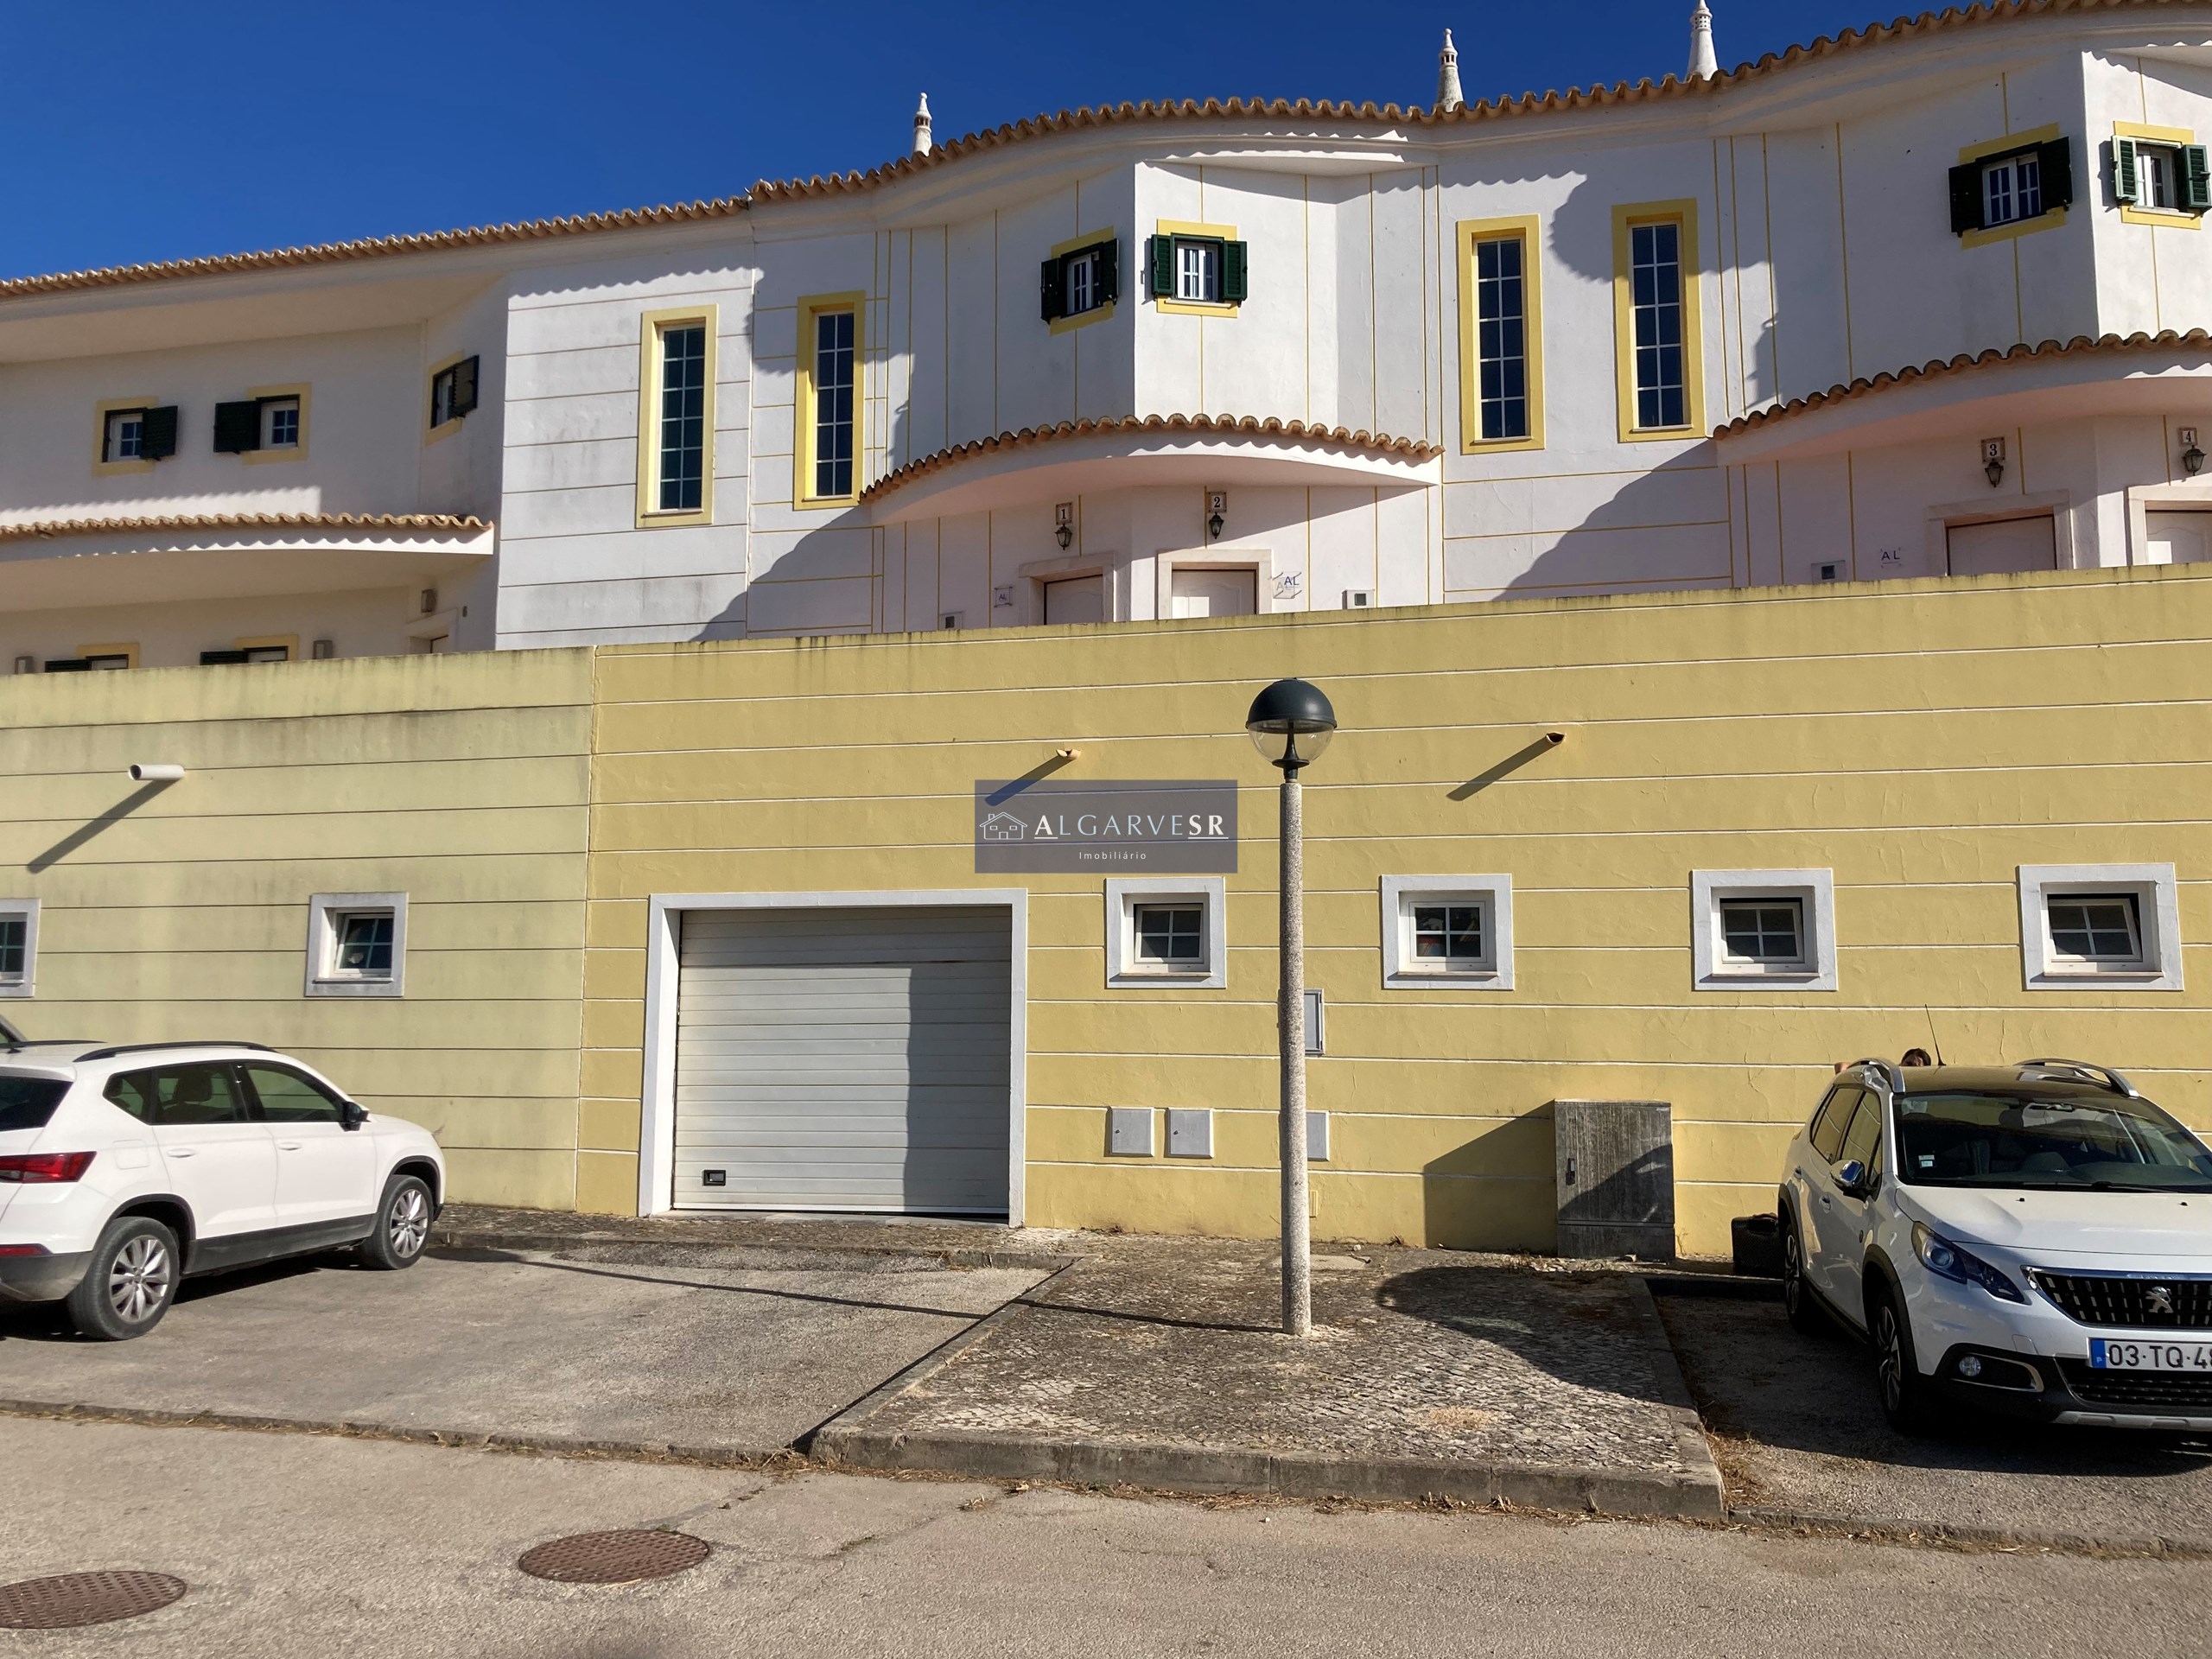 Lovely two bedroom townhouse - Montinhos da Luz with pool and parking